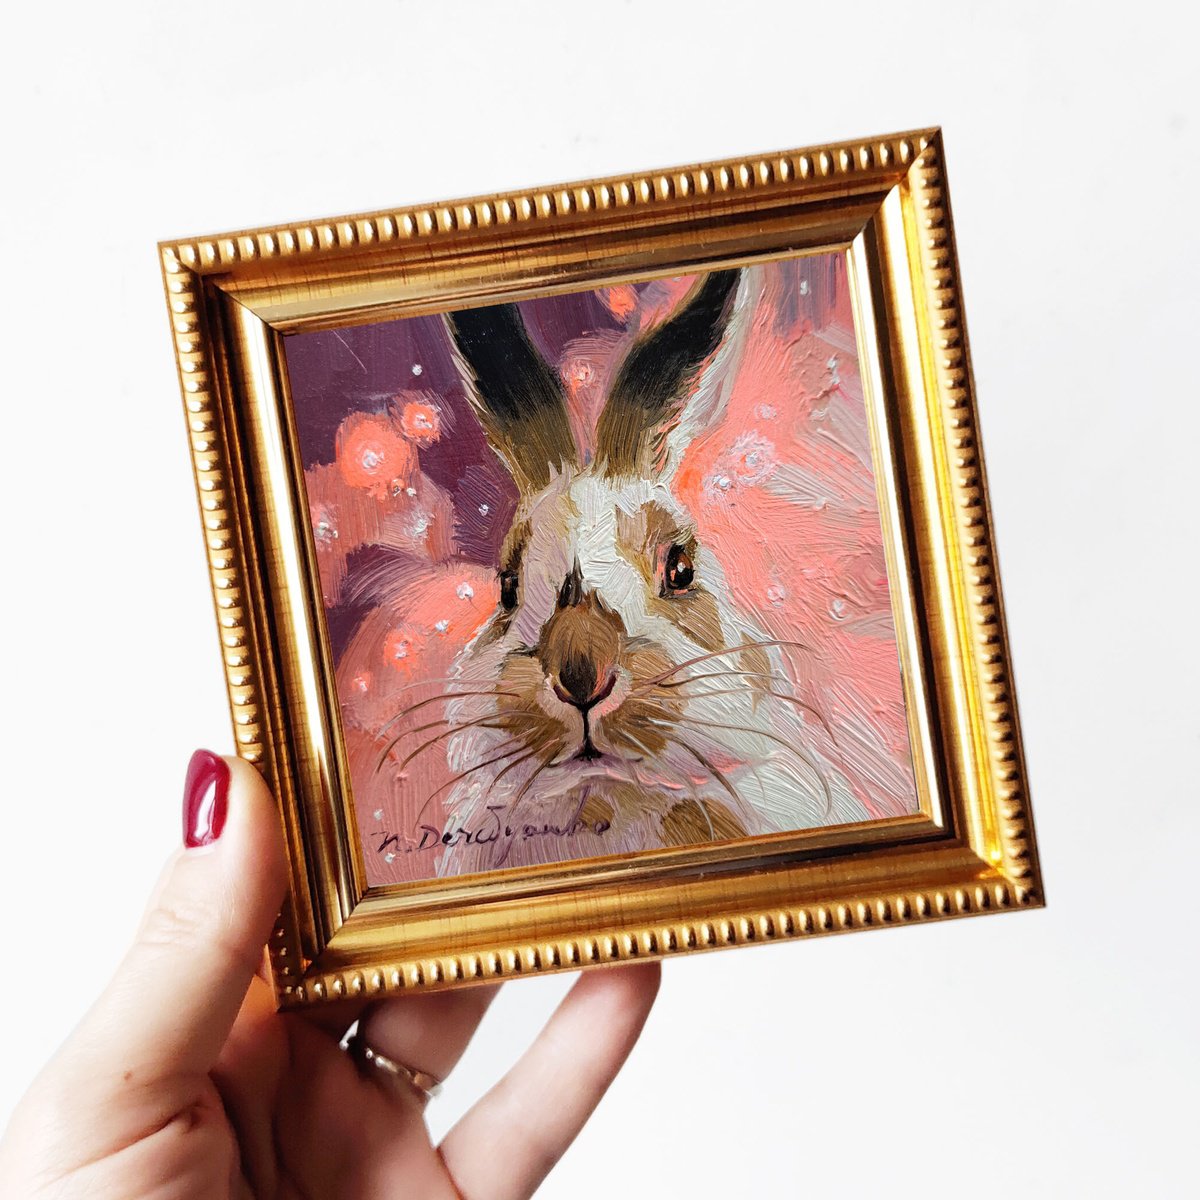 Beige white rabbit painting original pink backgroung art framed 4x4 inch, Bunny small pain... by Nataly Derevyanko